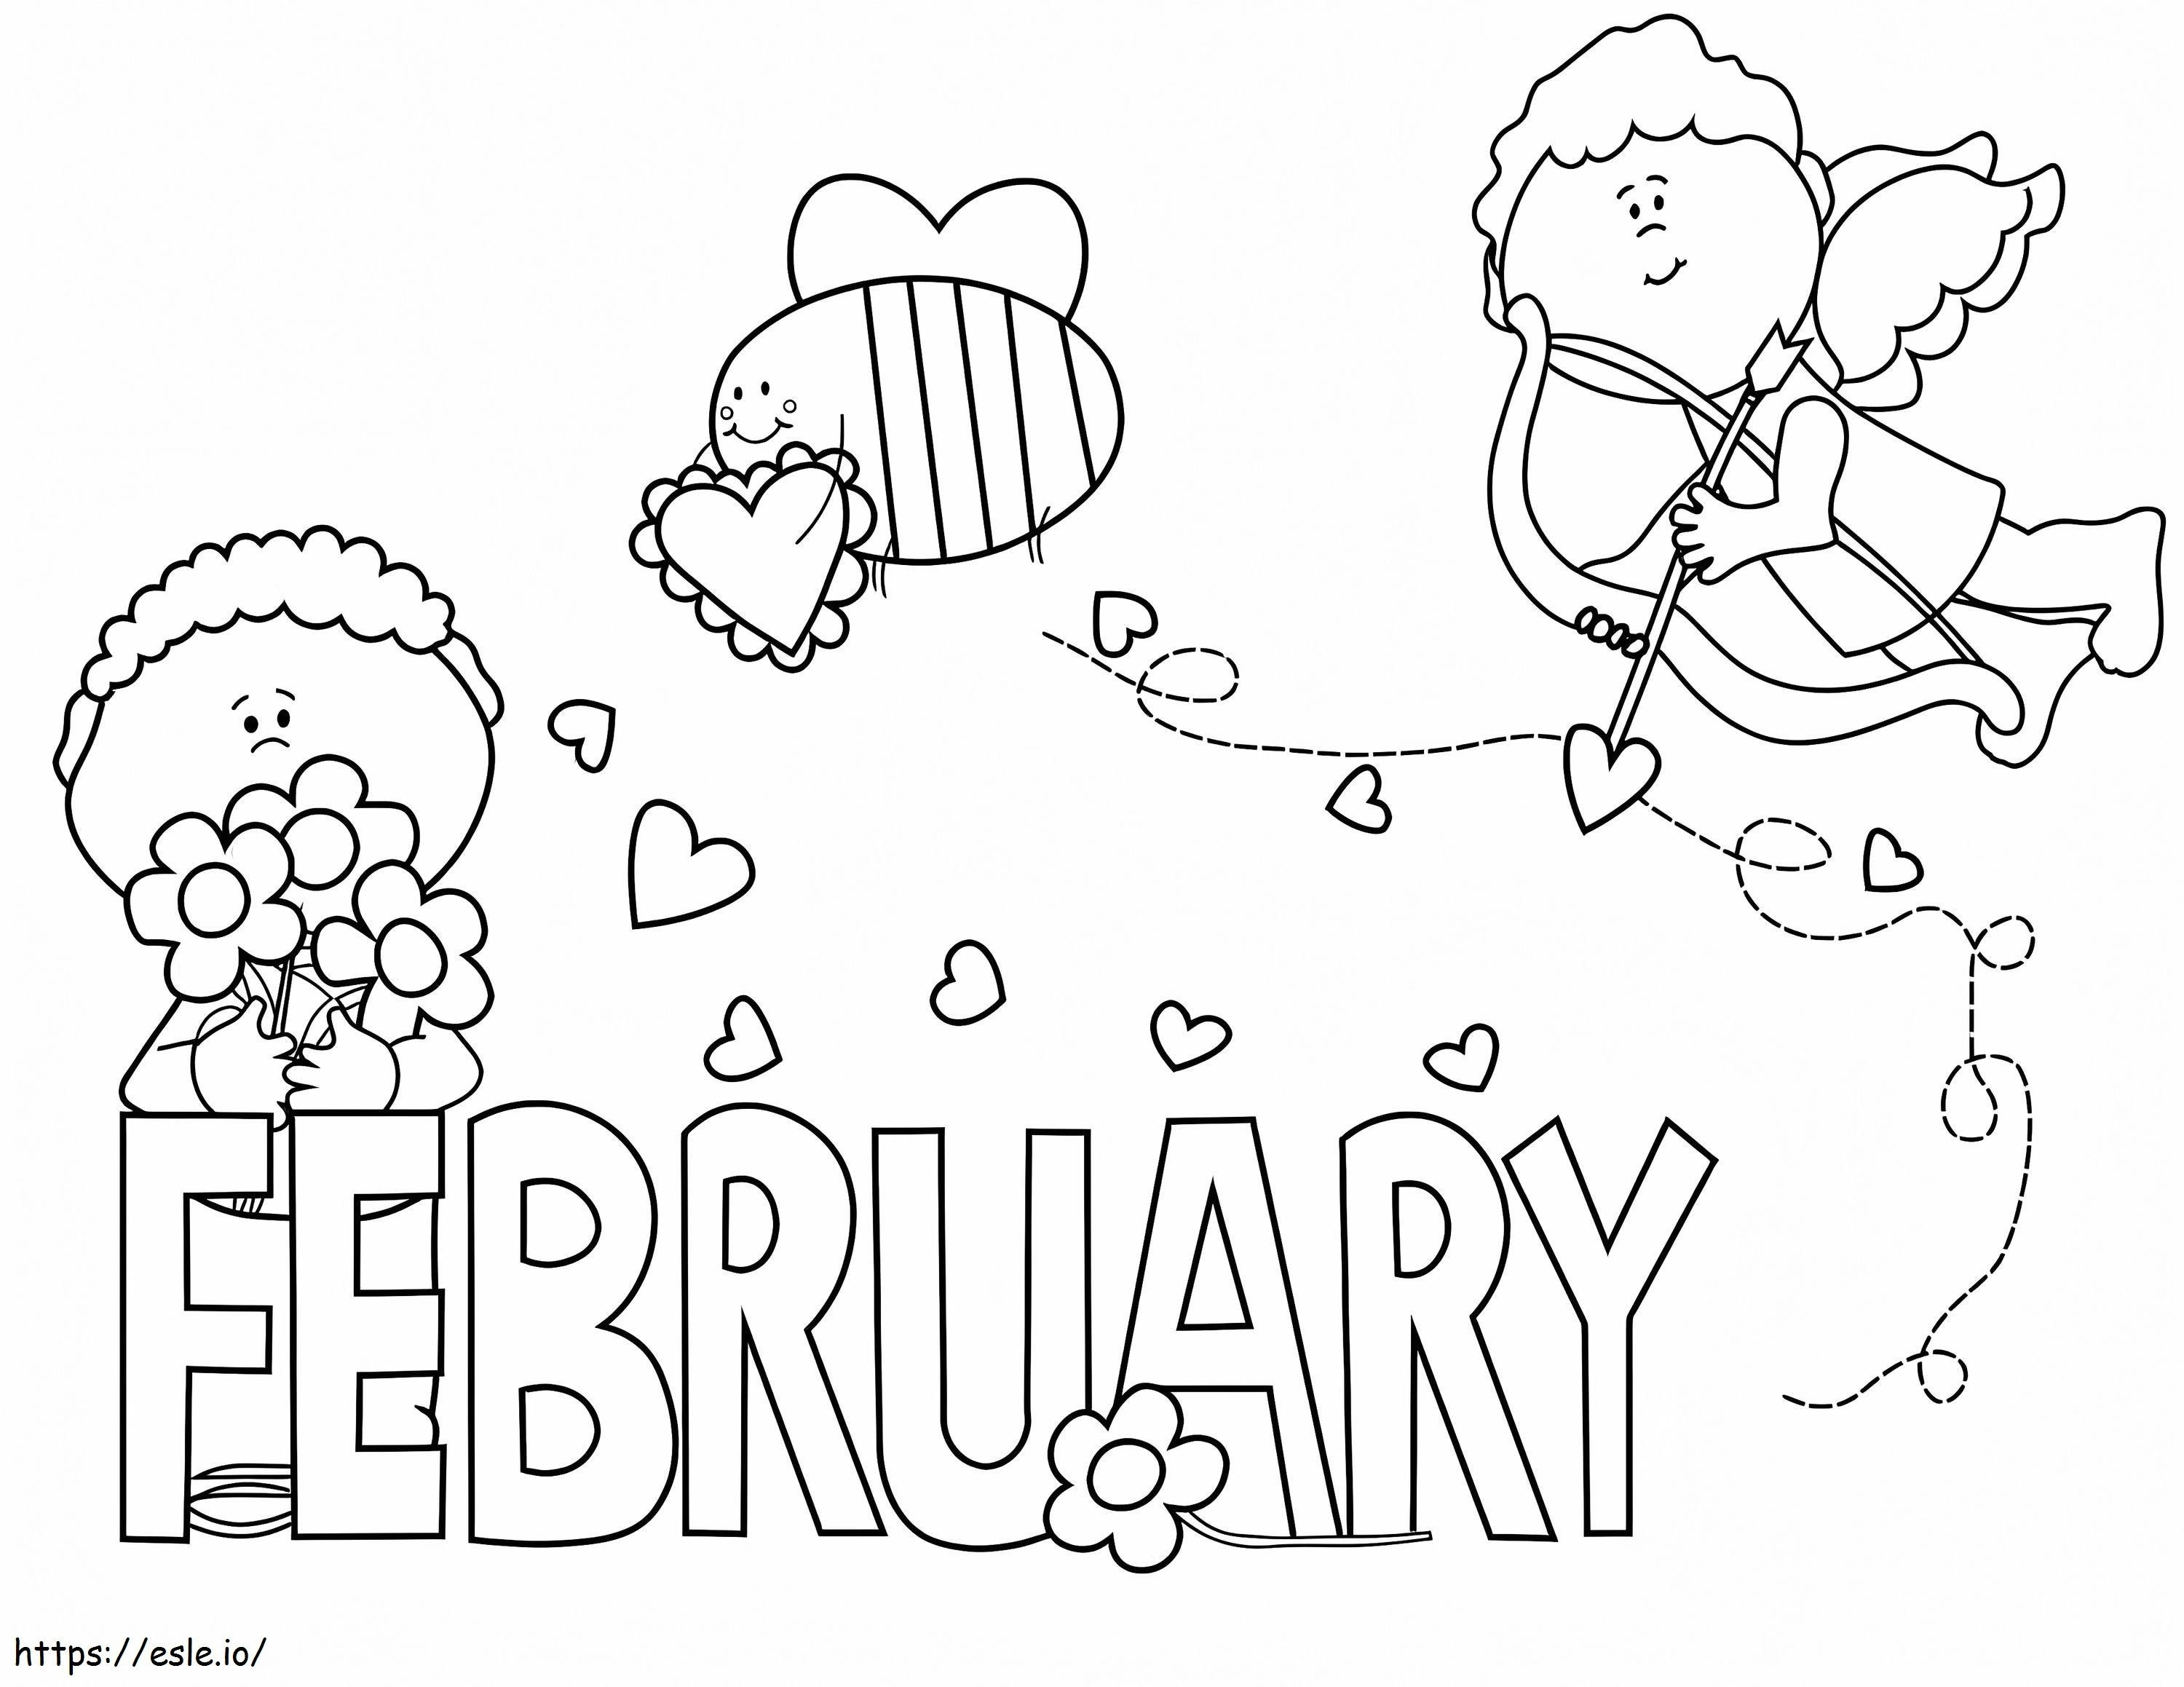 Adorable February Coloring Page coloring page